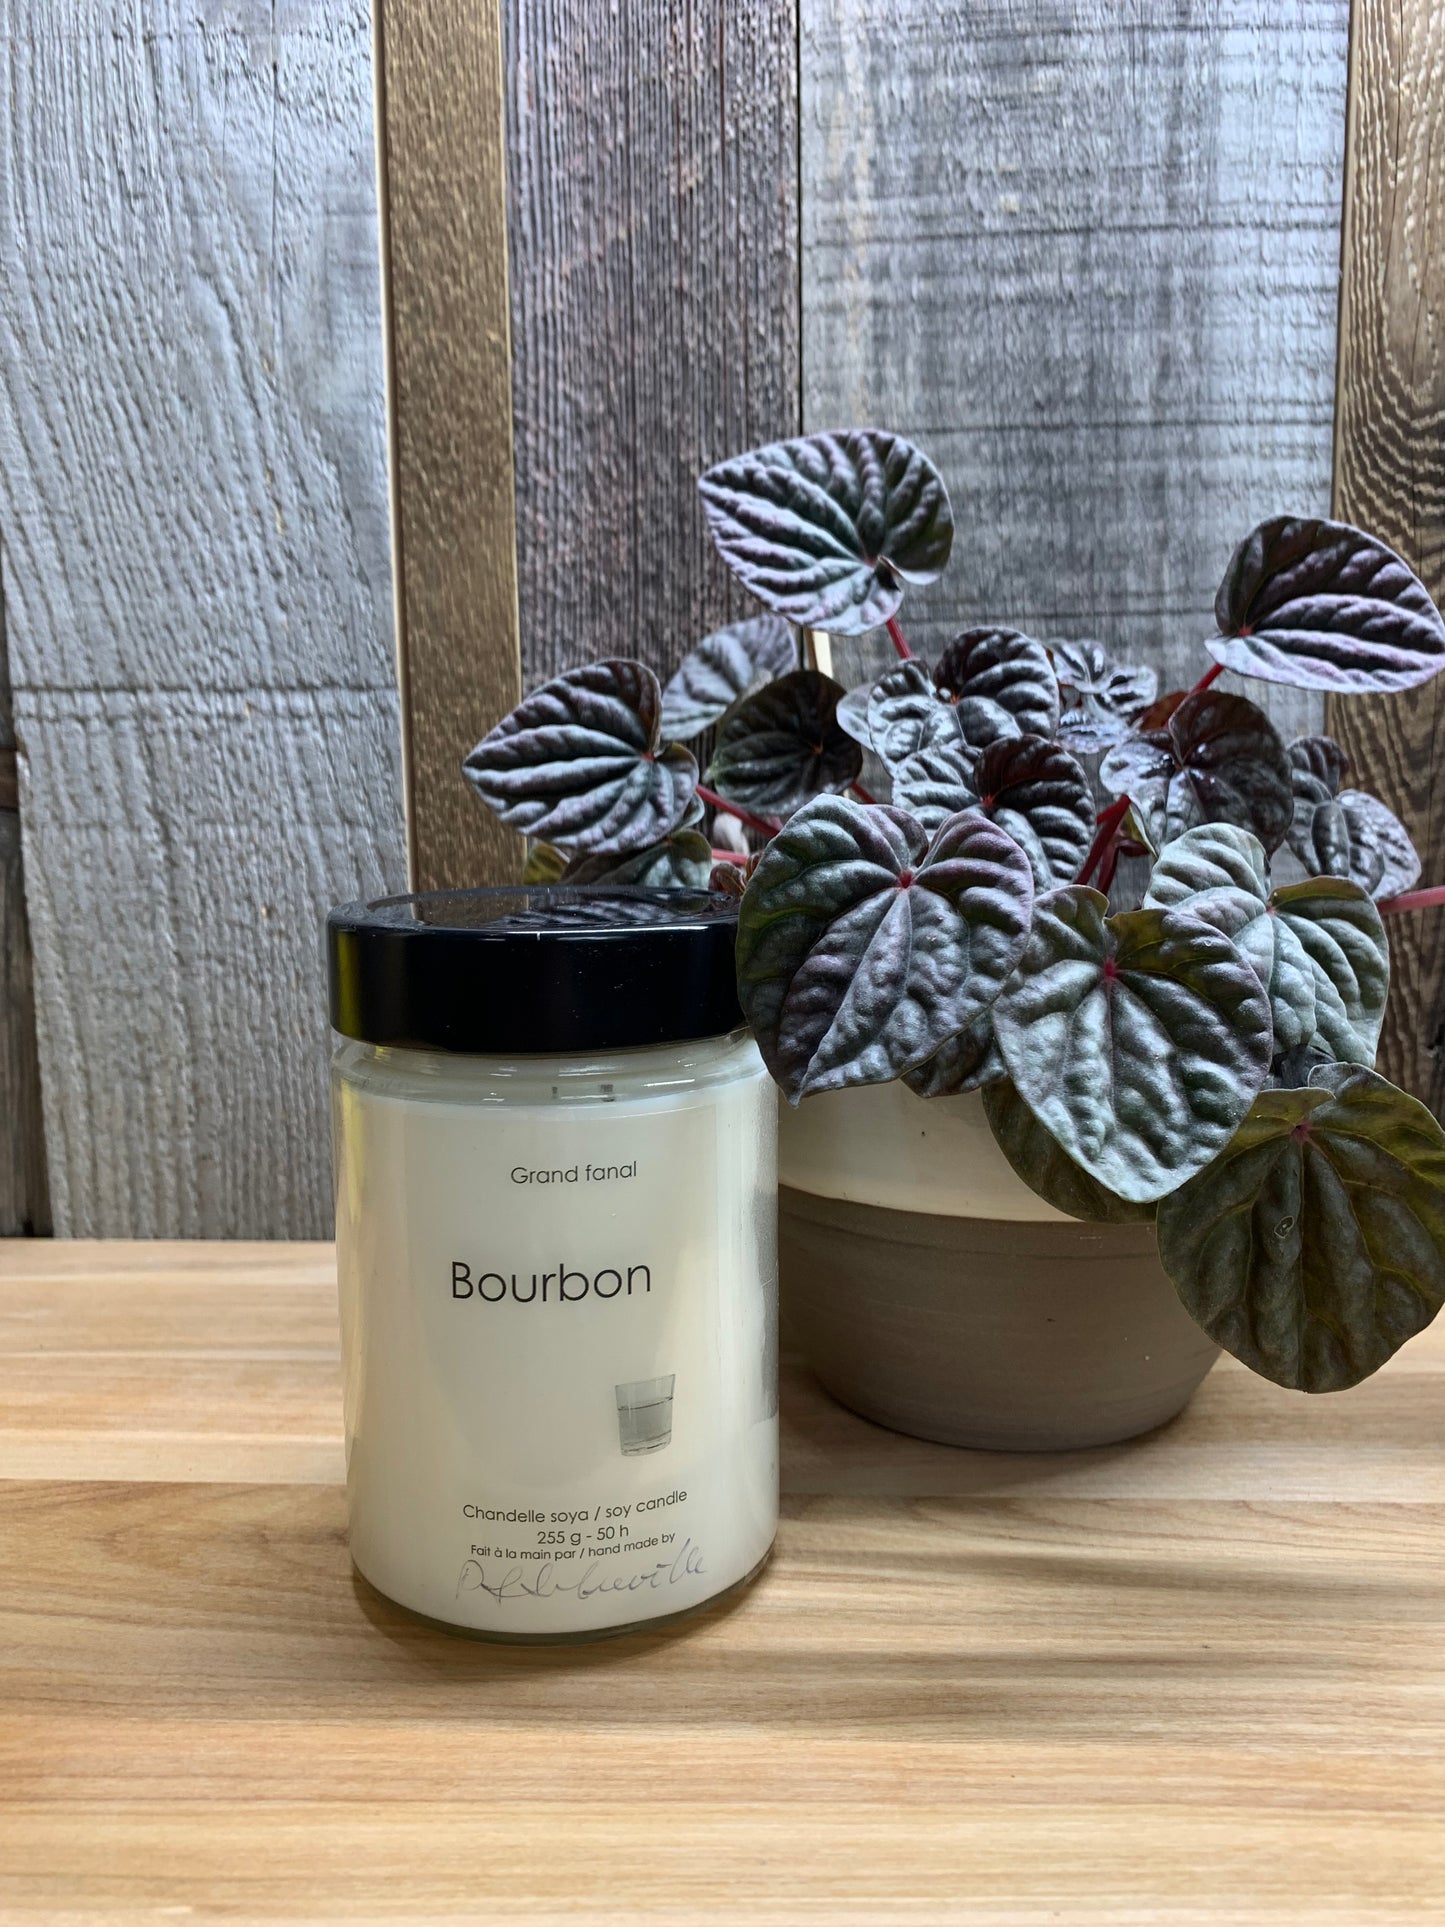 Bourbon soy candle